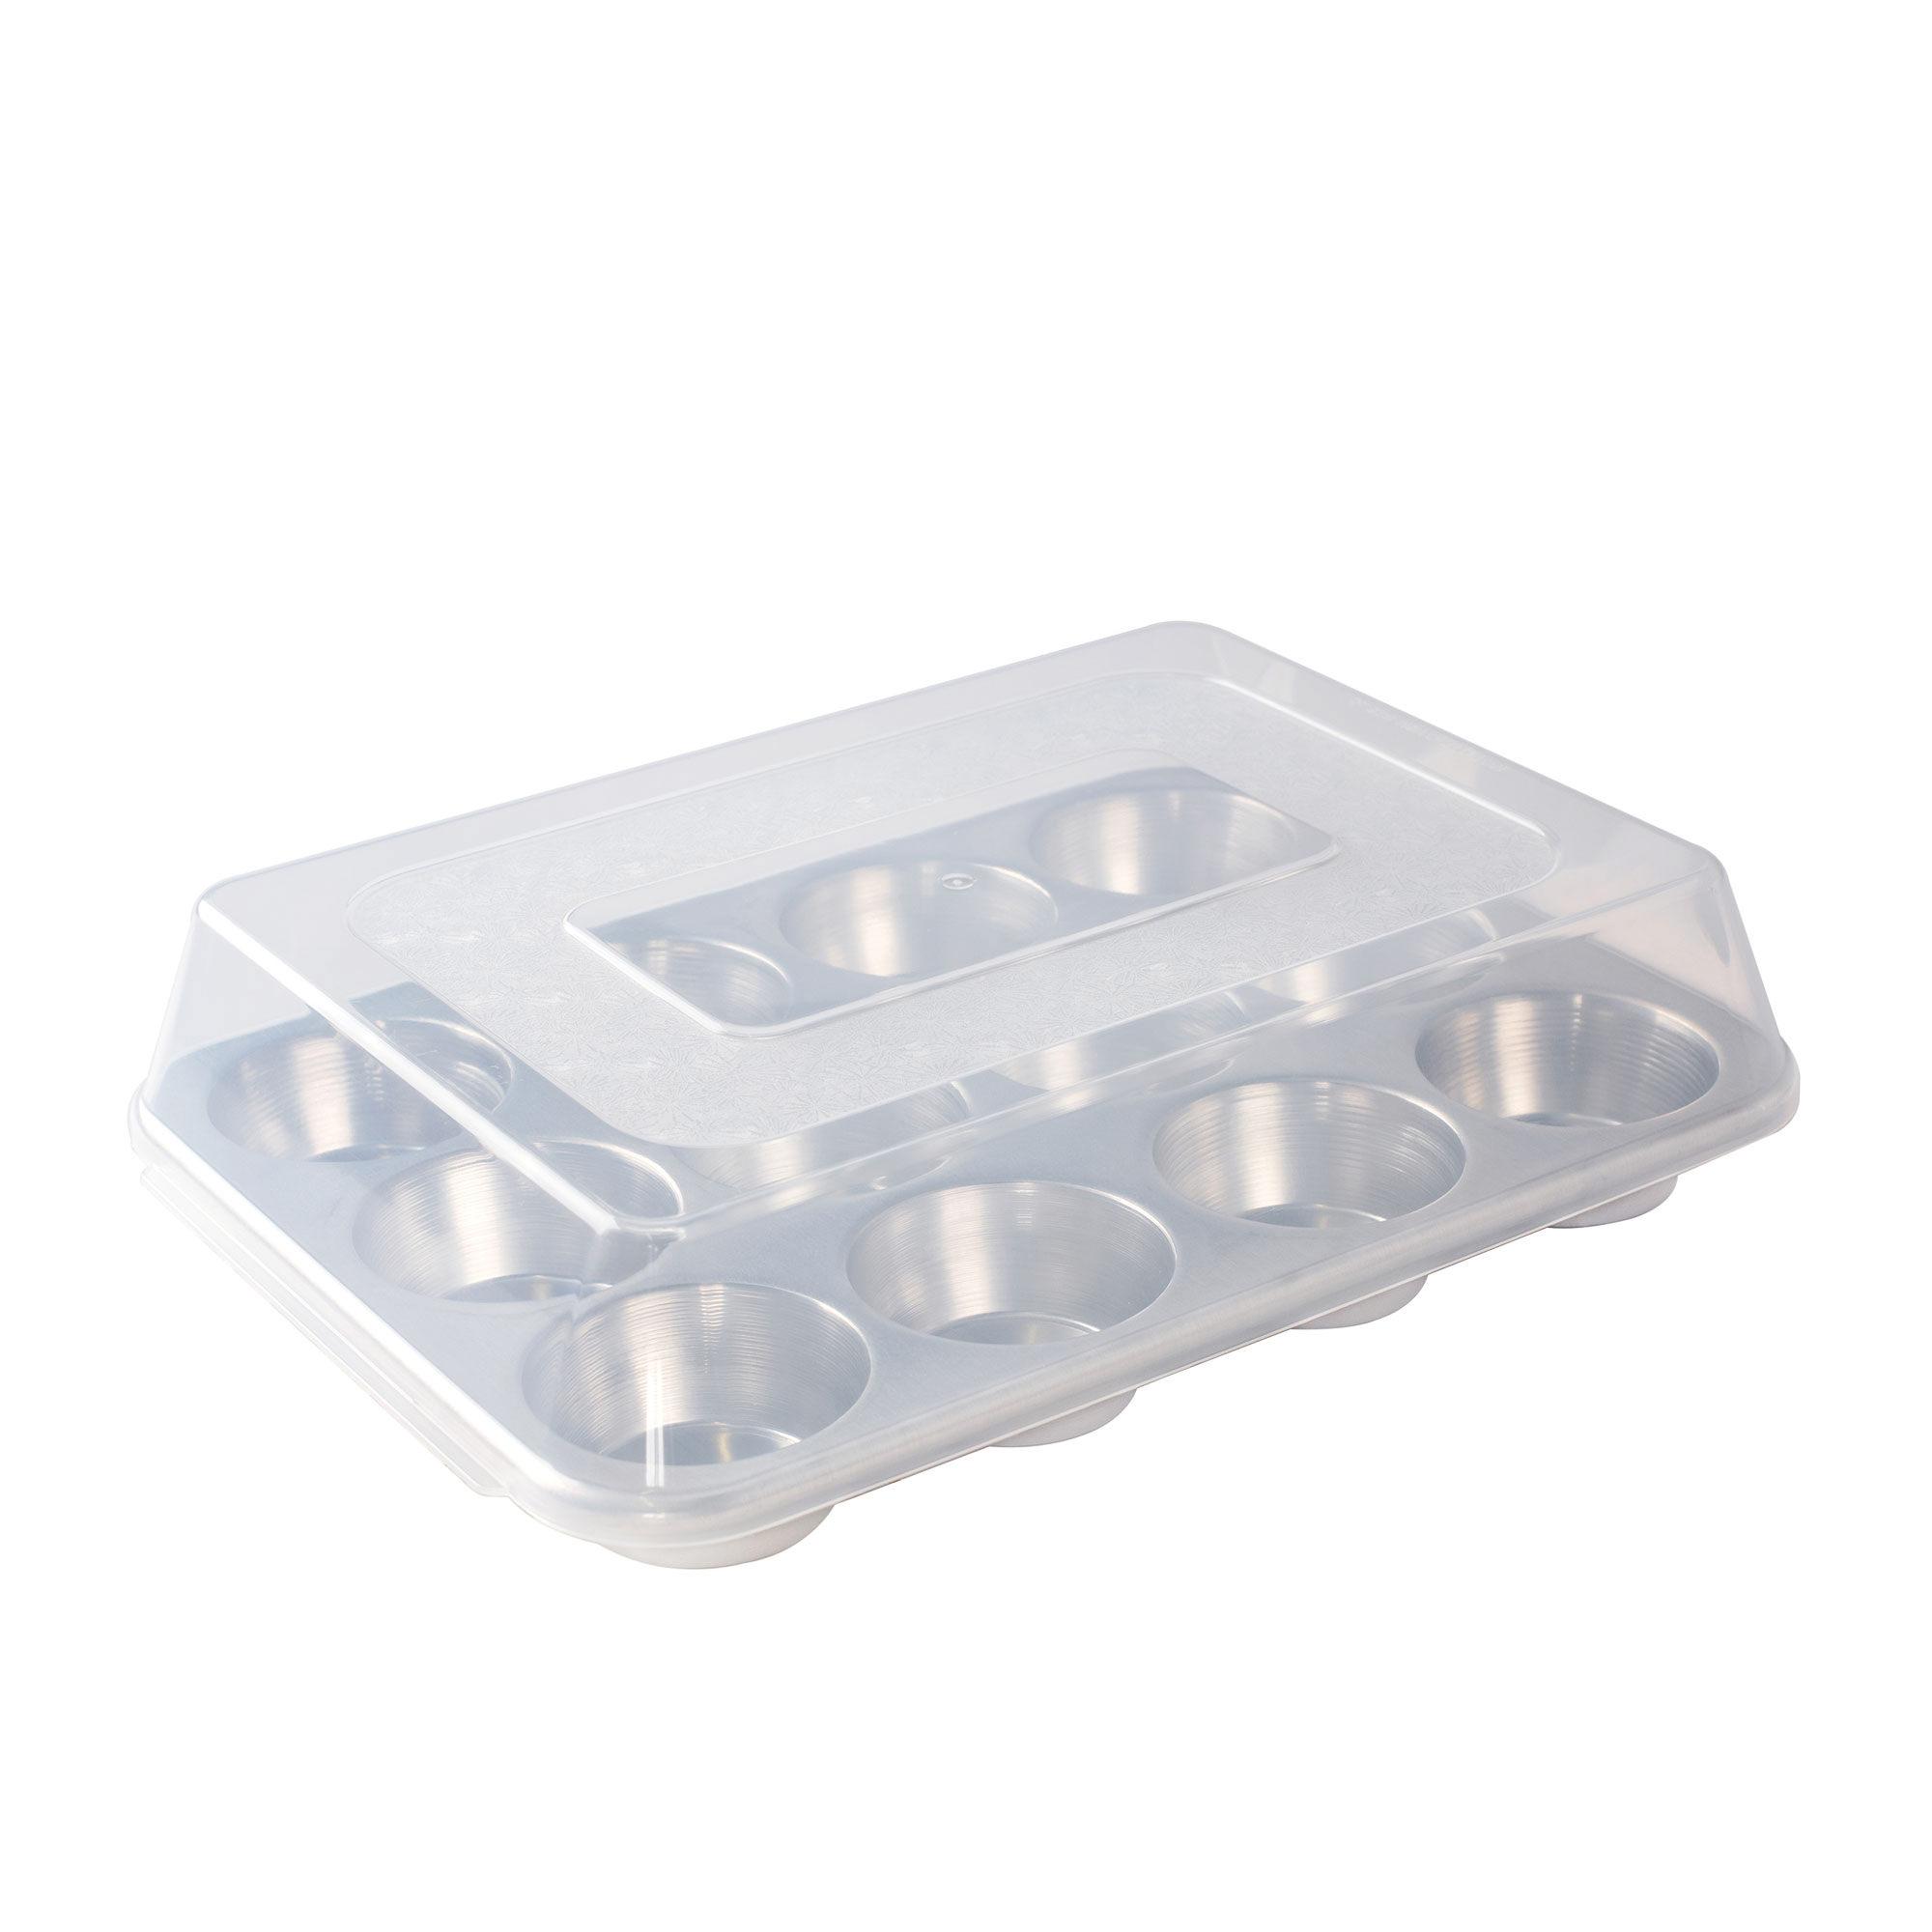 Nordic Ware Naturals Muffin Pan with High Dome Lid 12 Cup Image 5